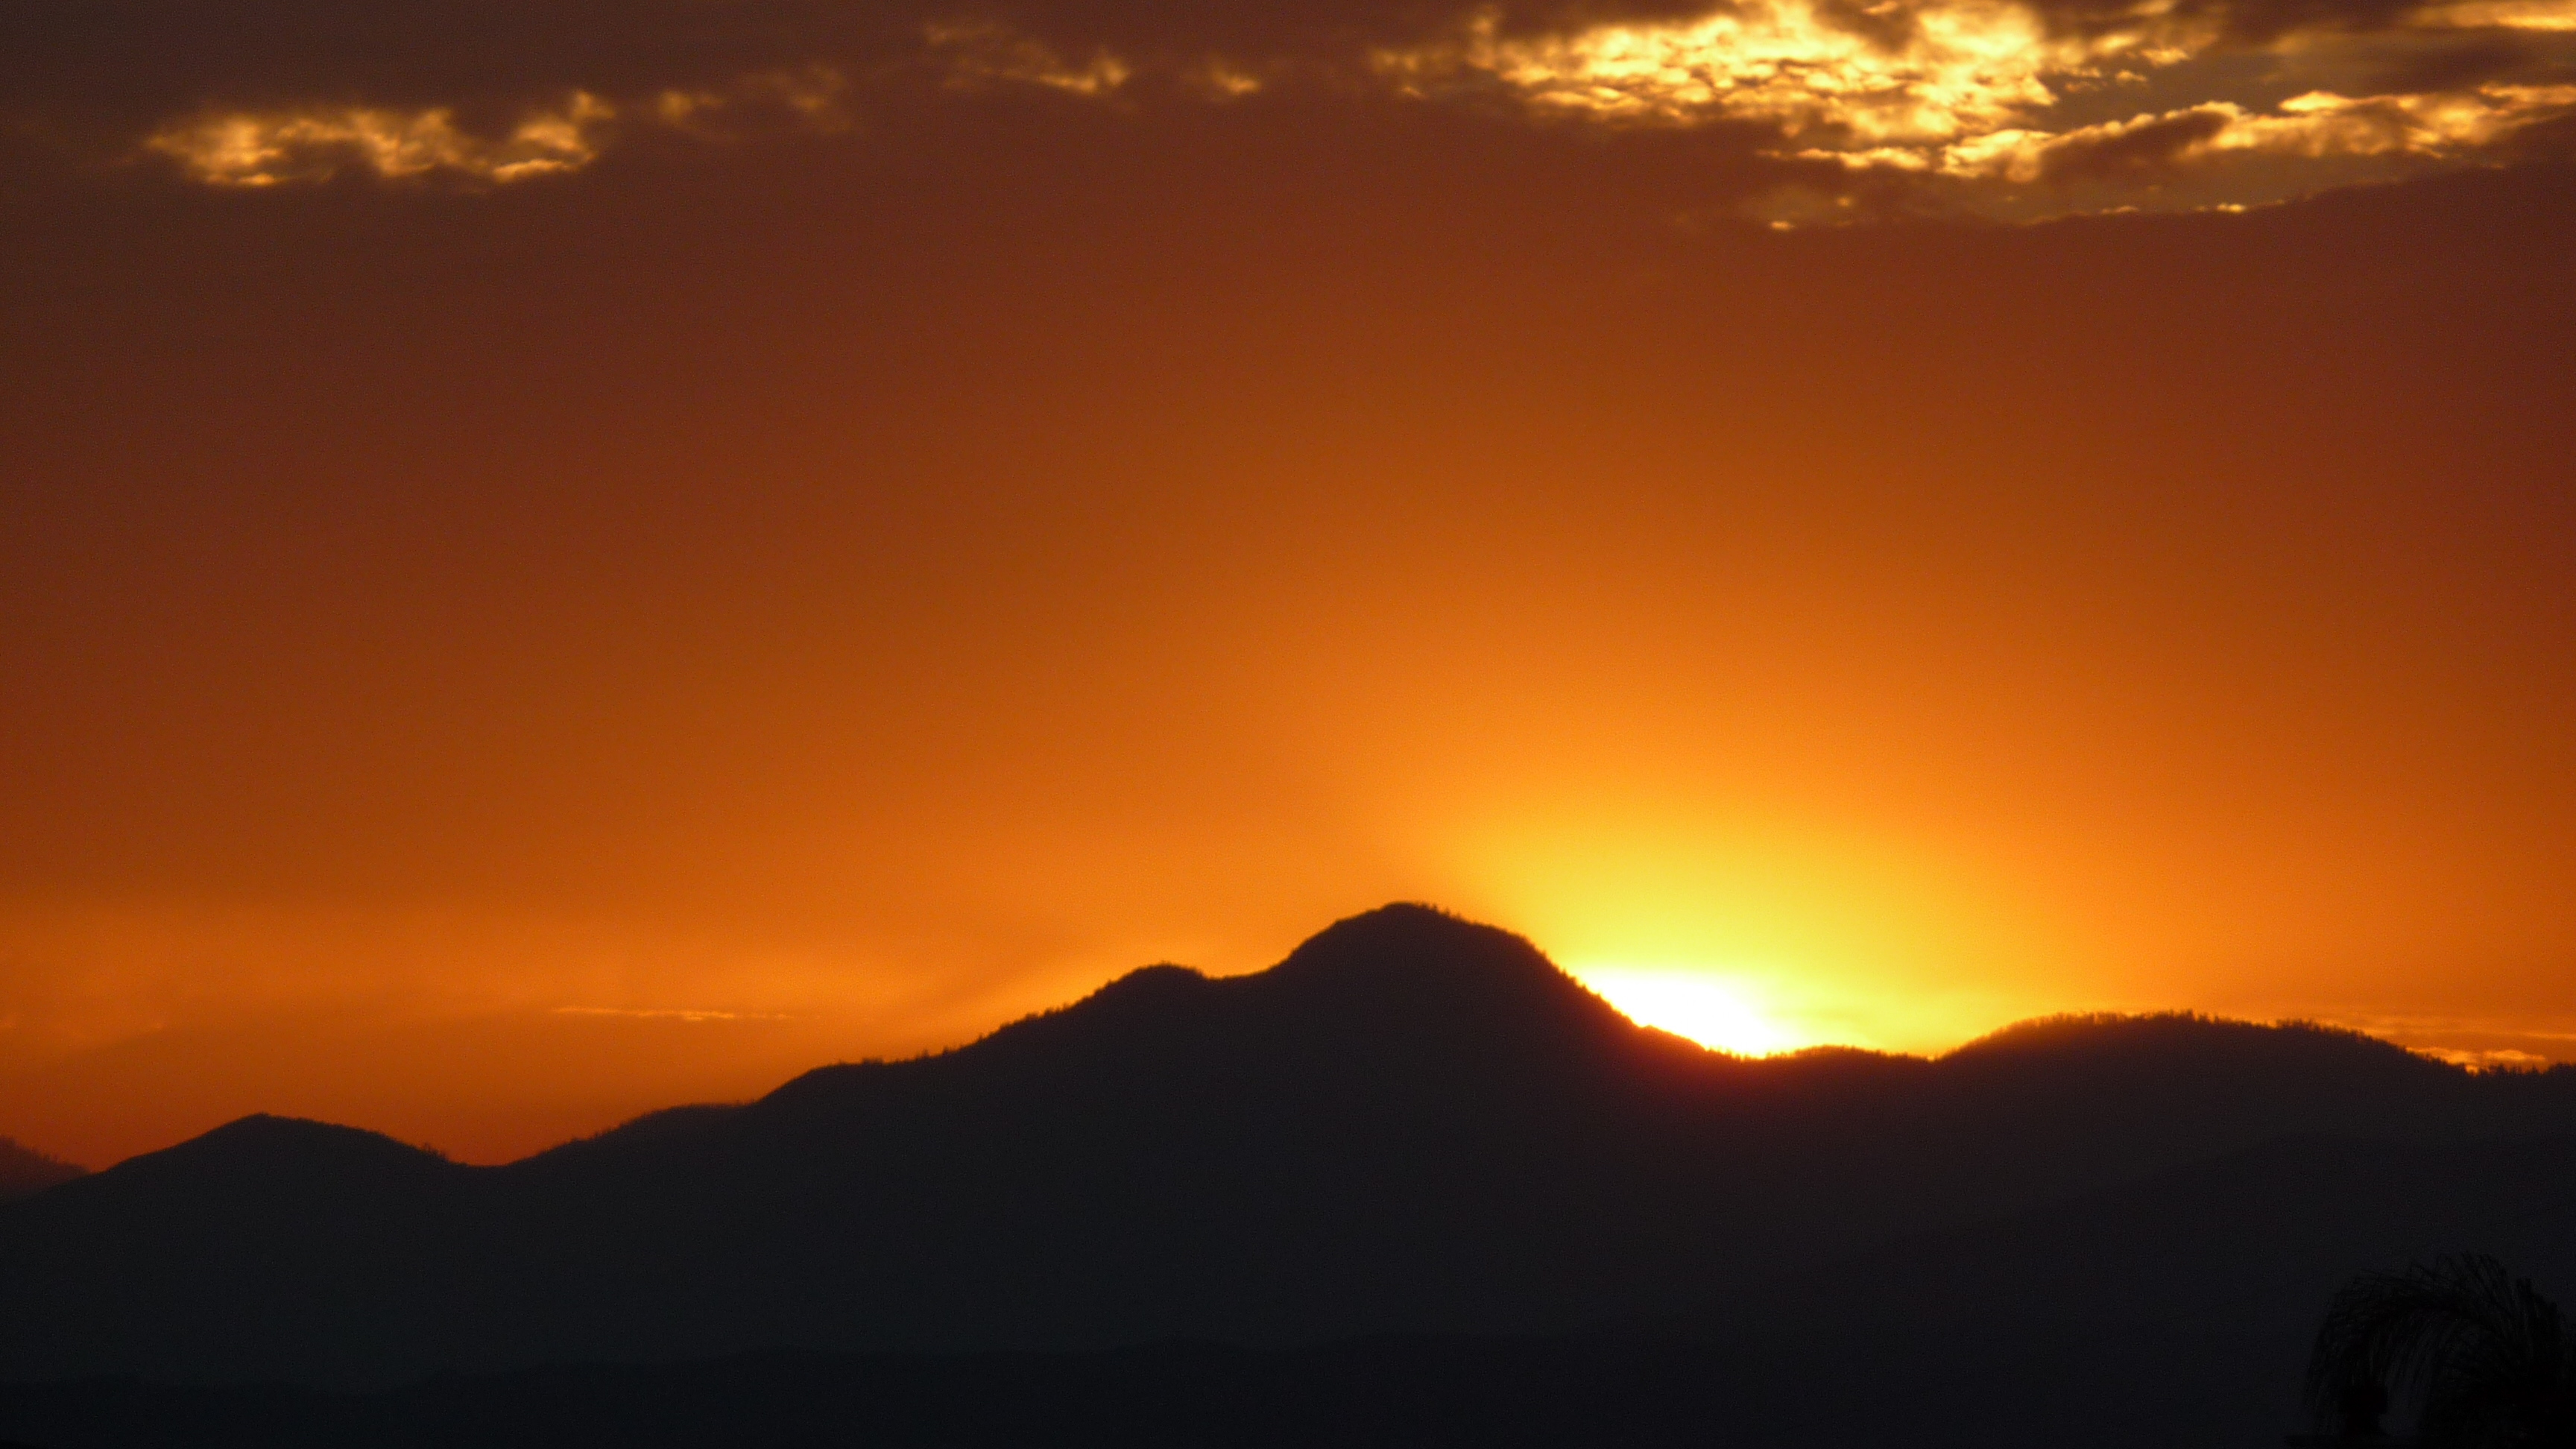 File:Sunset Over The Topatopa Mountains - From Santa Clarita.jpg ...